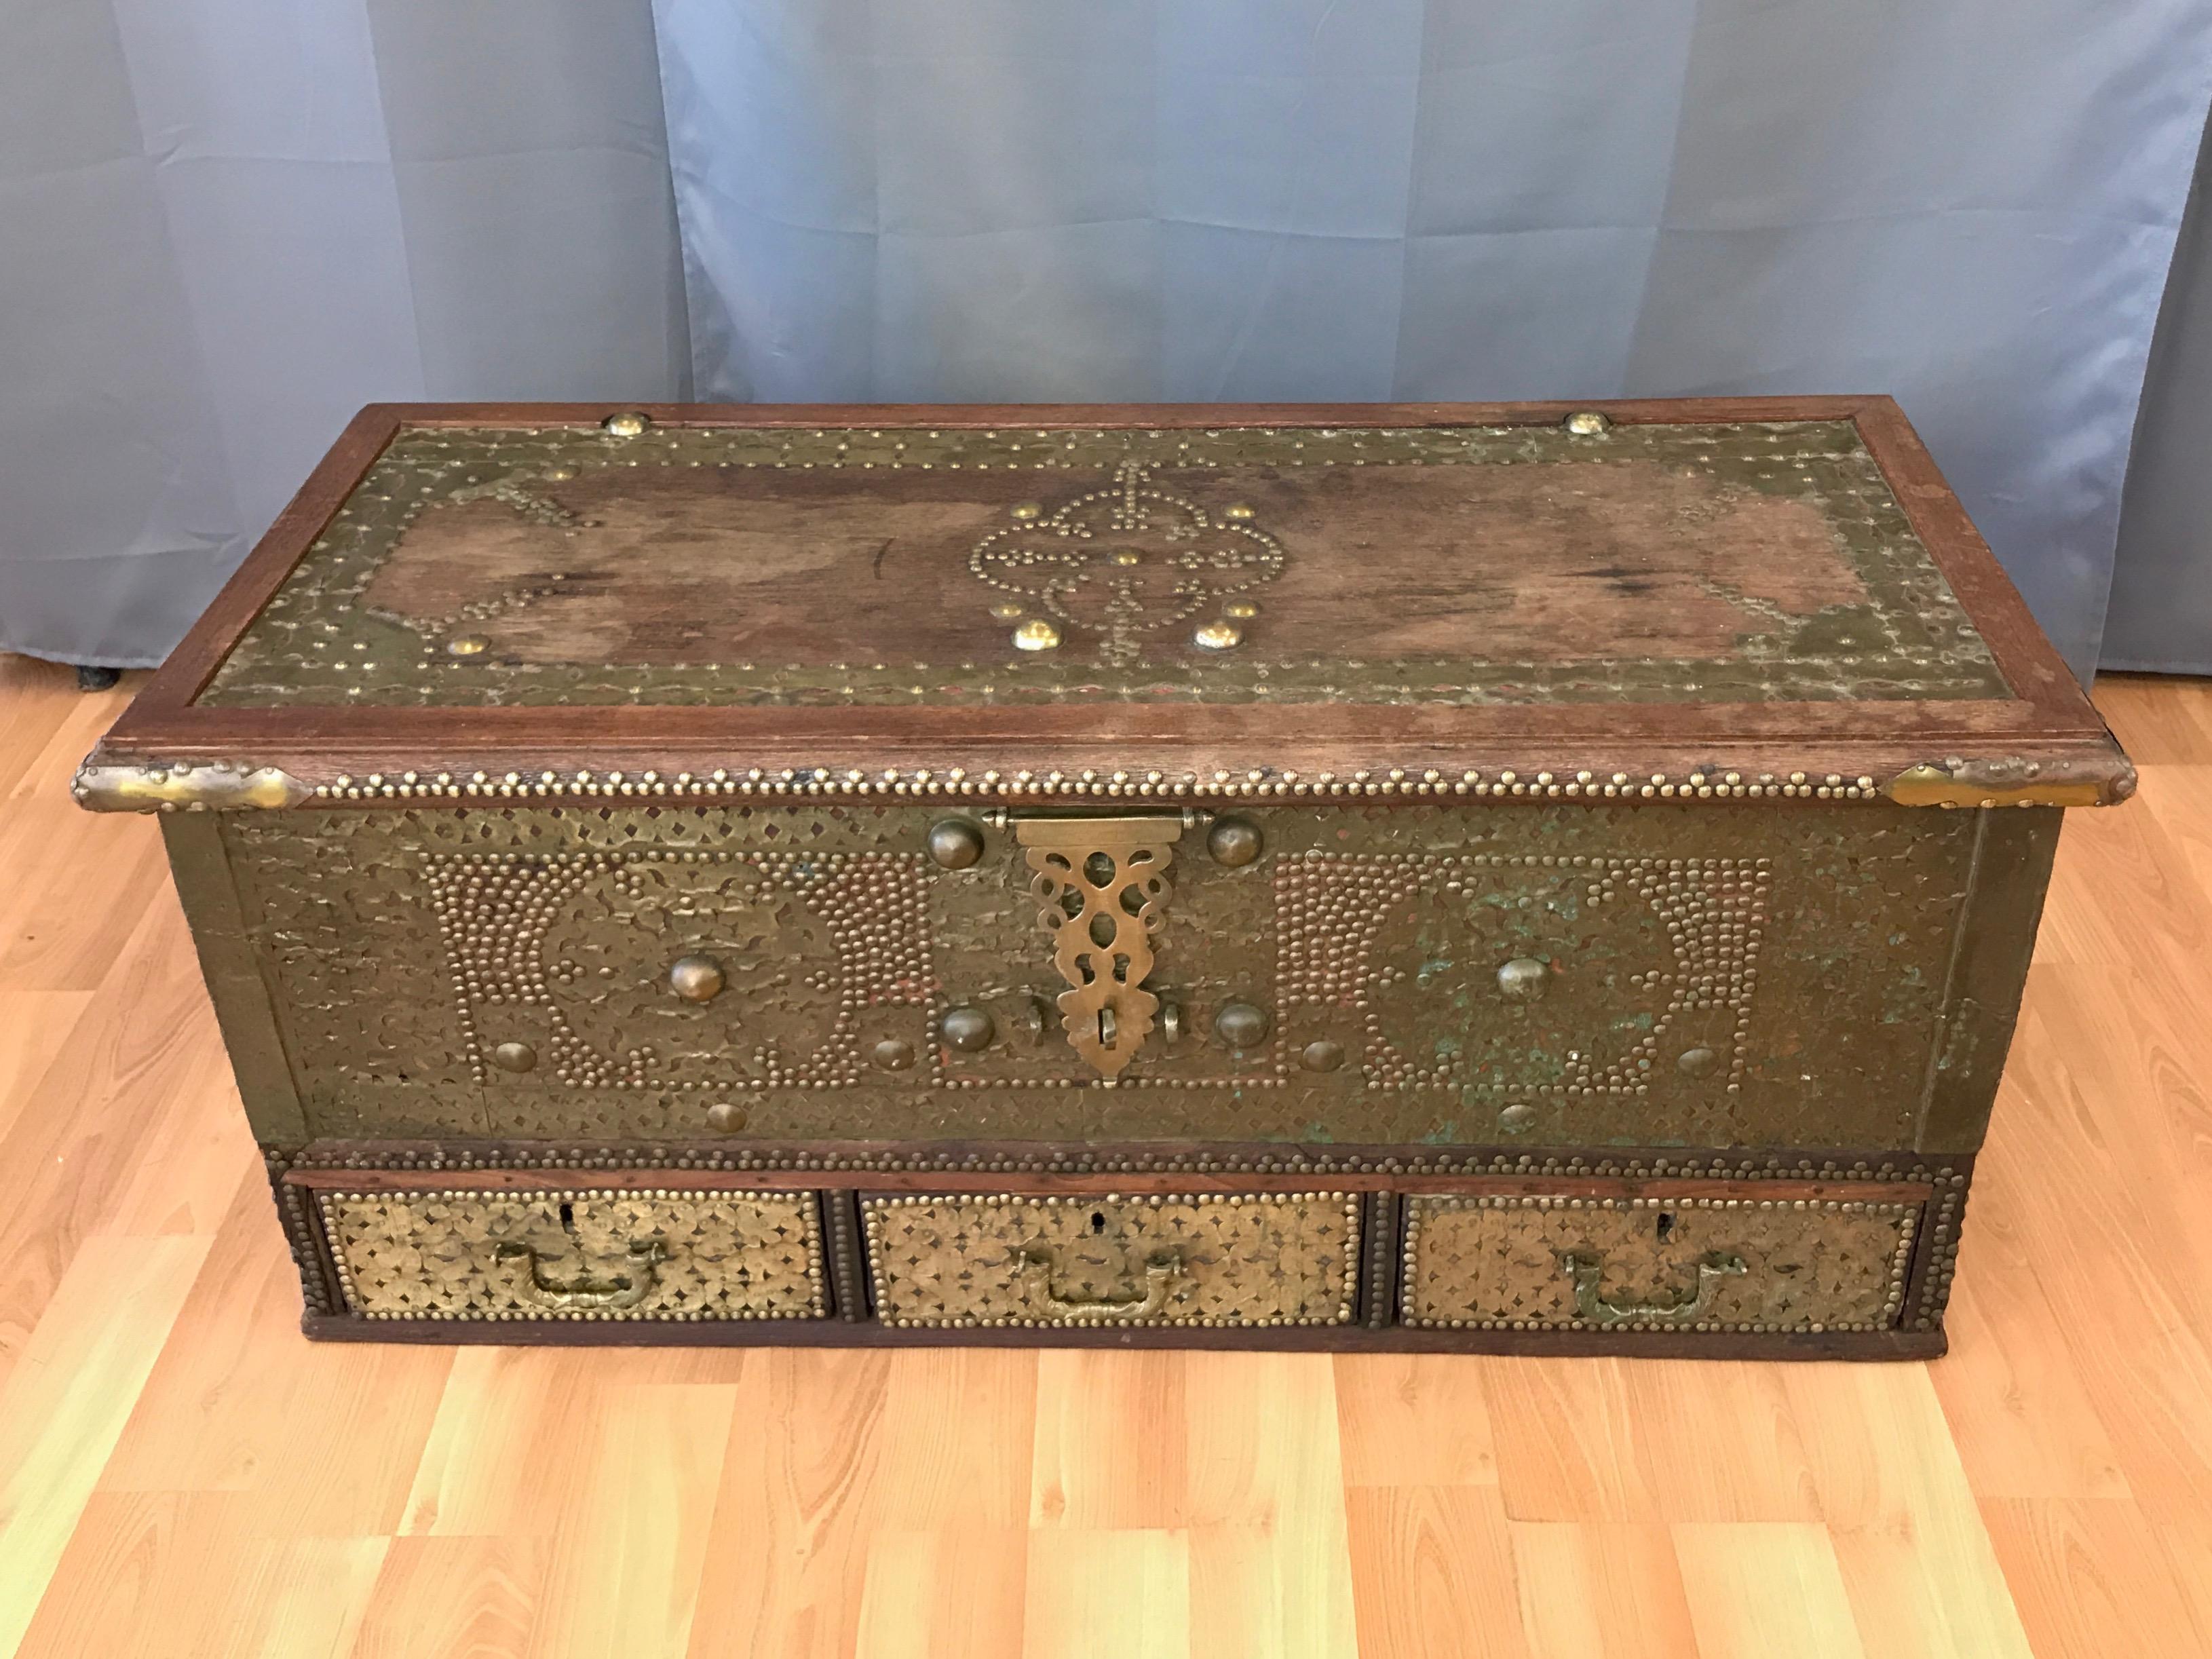 Syrian Antique Middle Eastern Brass-Clad Wood Sailor’s Chest